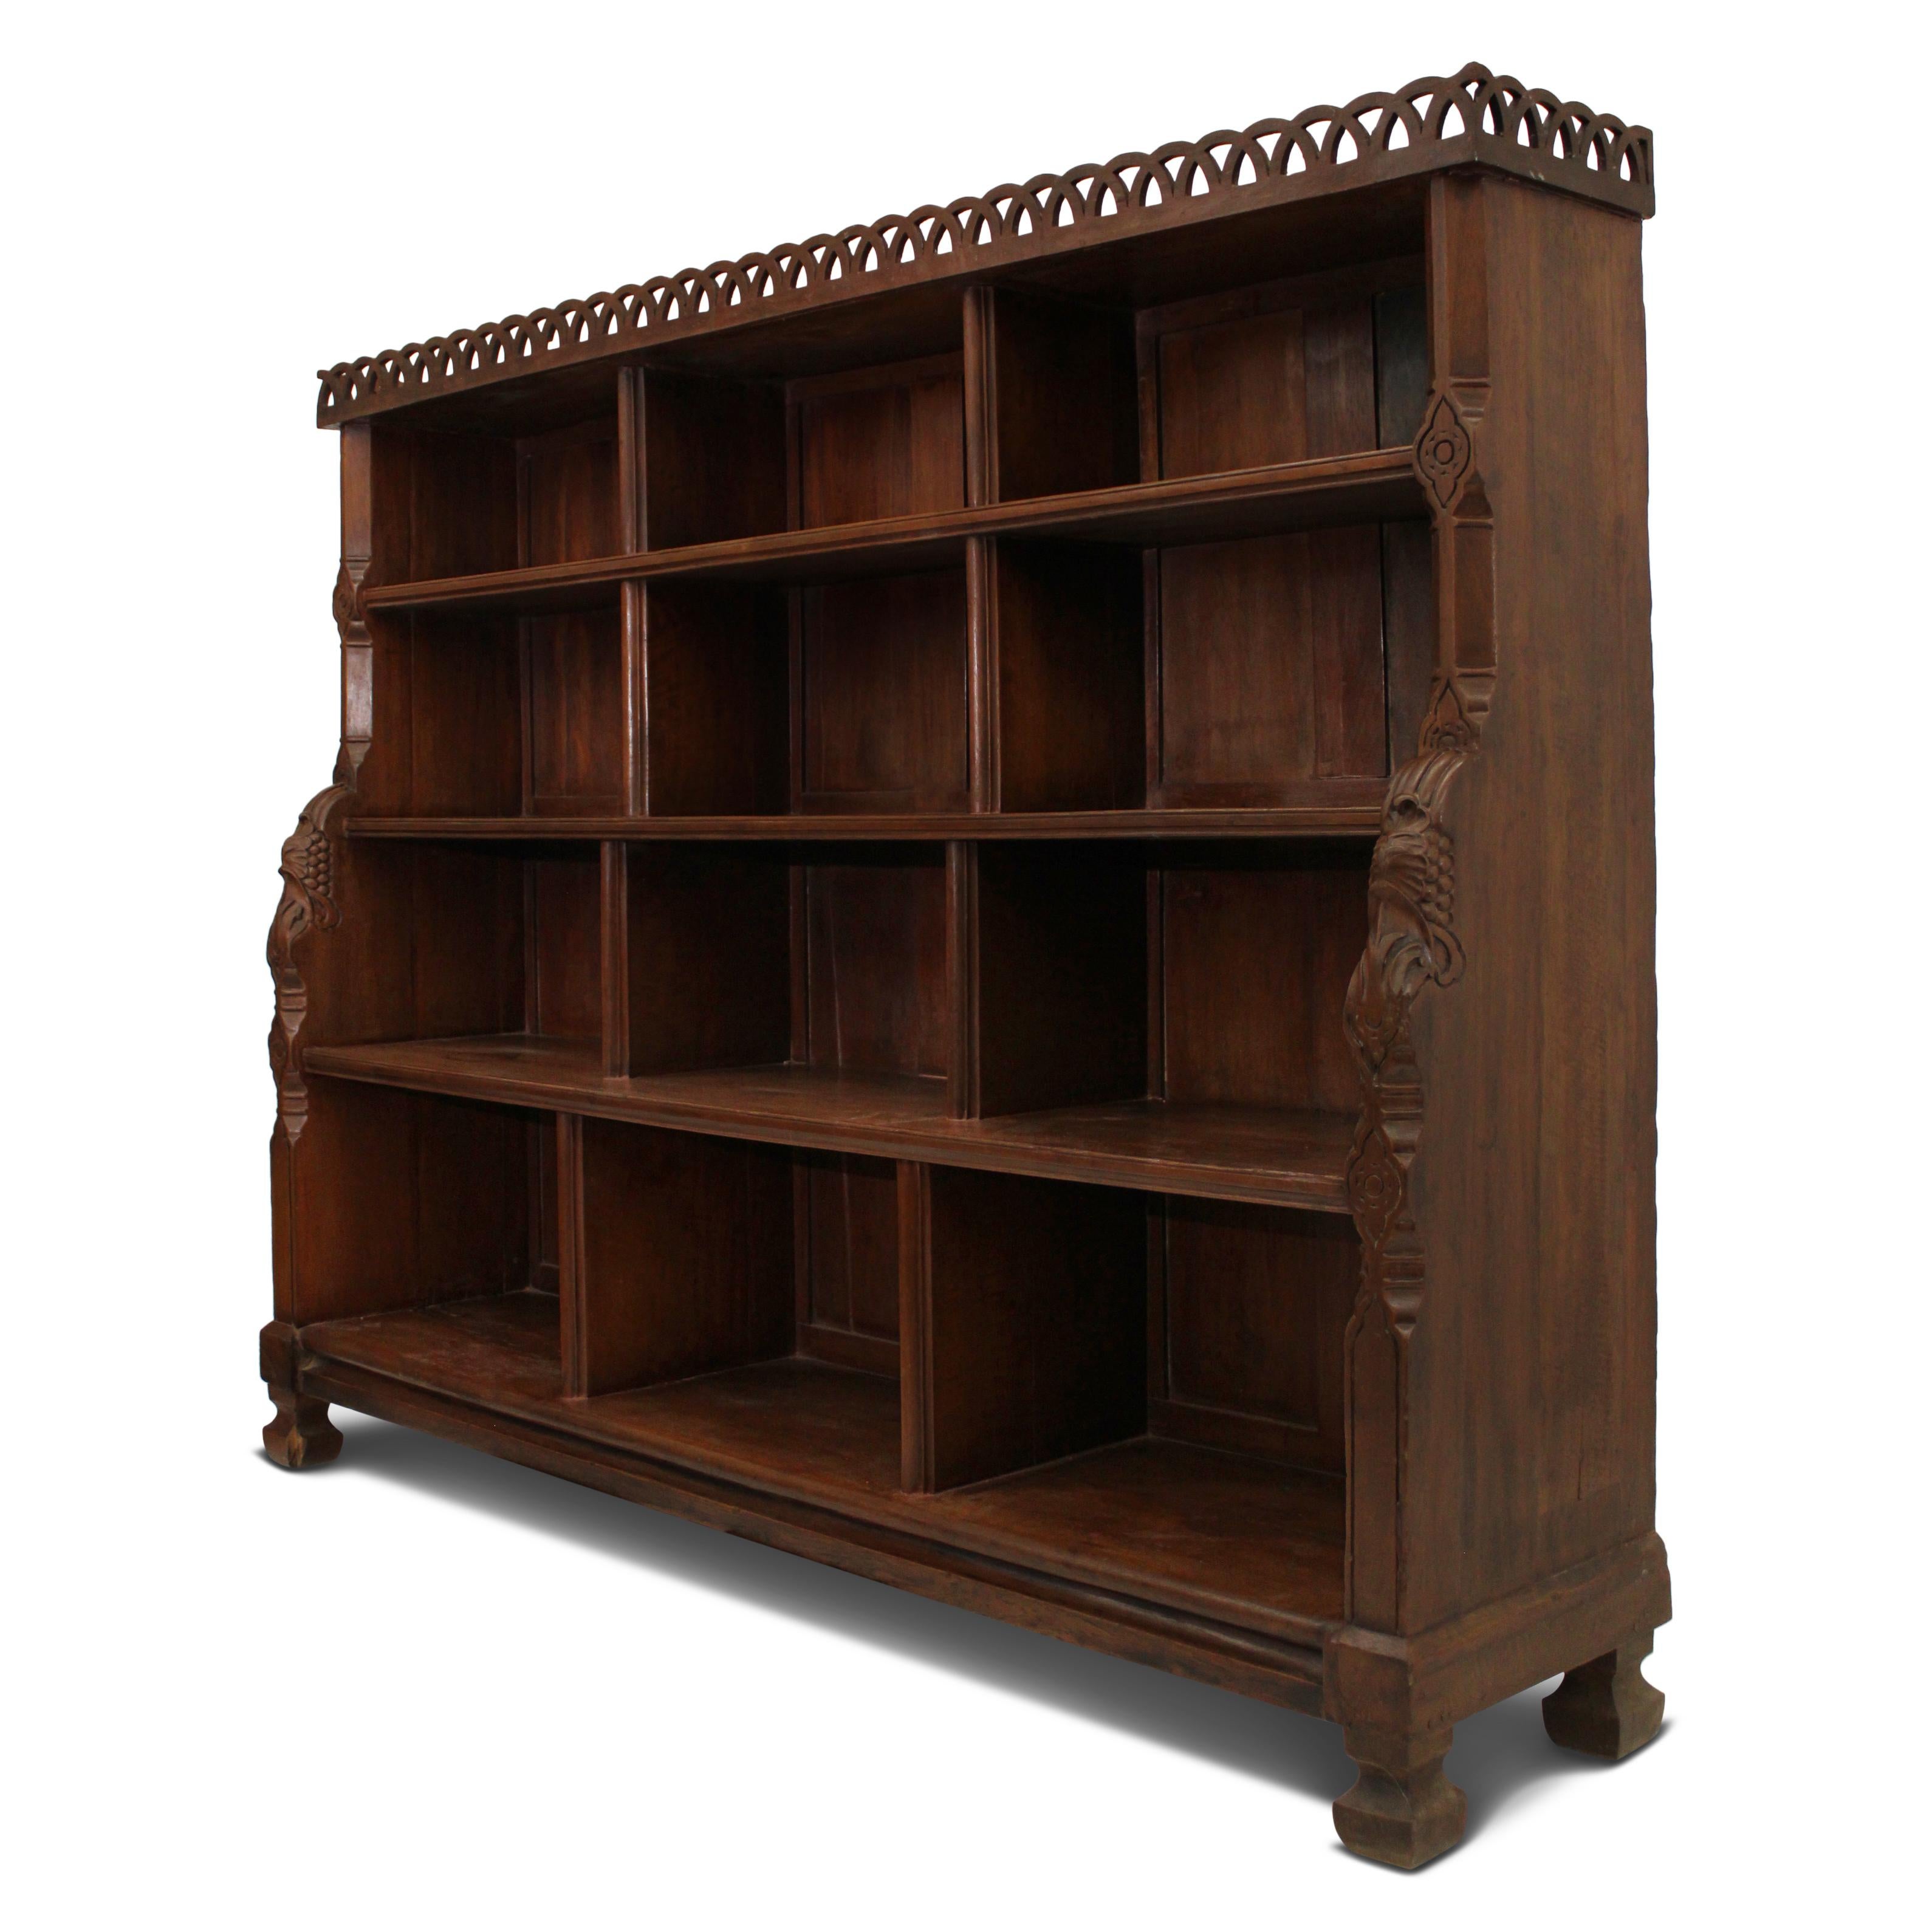 Teak Bookcase From an Indian Palace 1